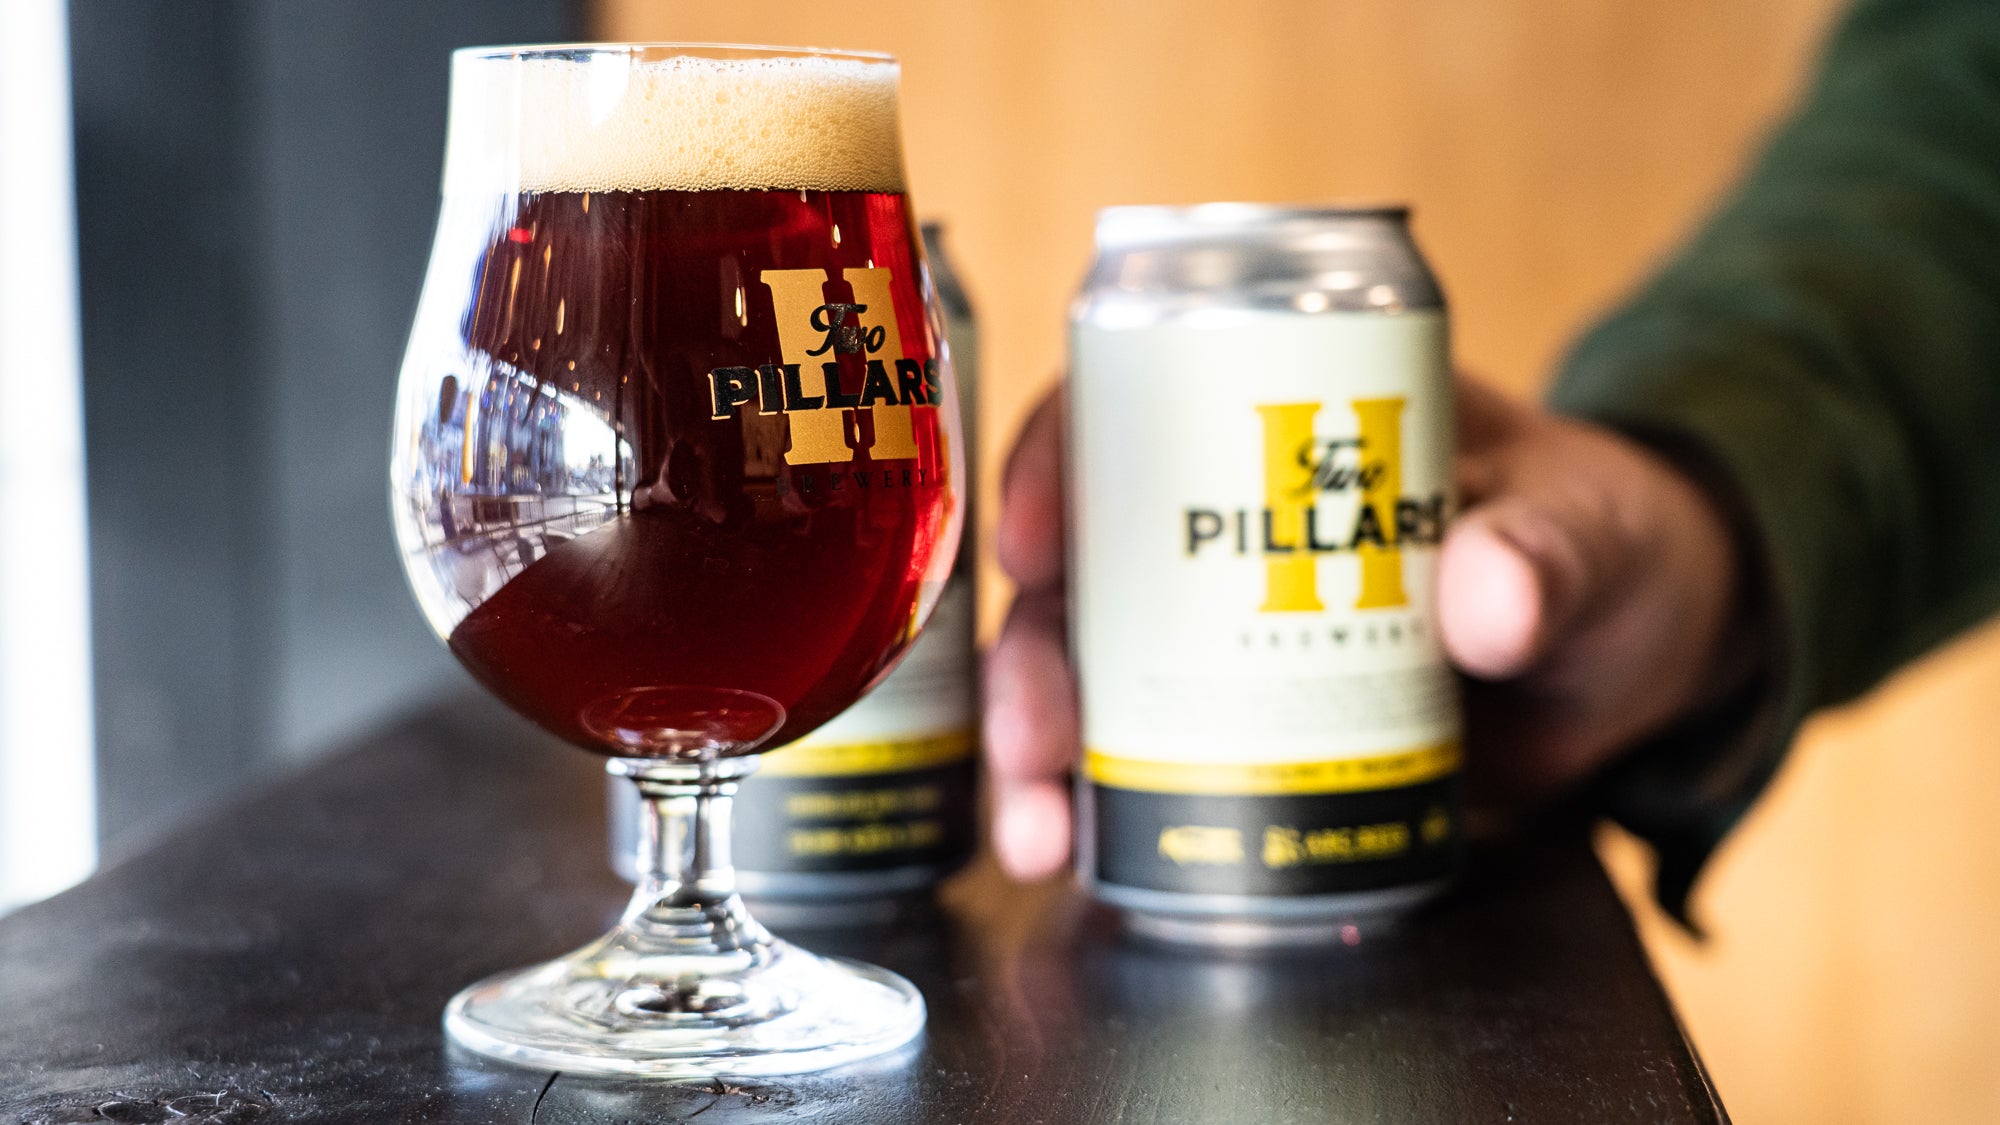 Knifewear Beer Collaboration with Two Pillars Brewing, ABC Bees, & Kent of Inglewood